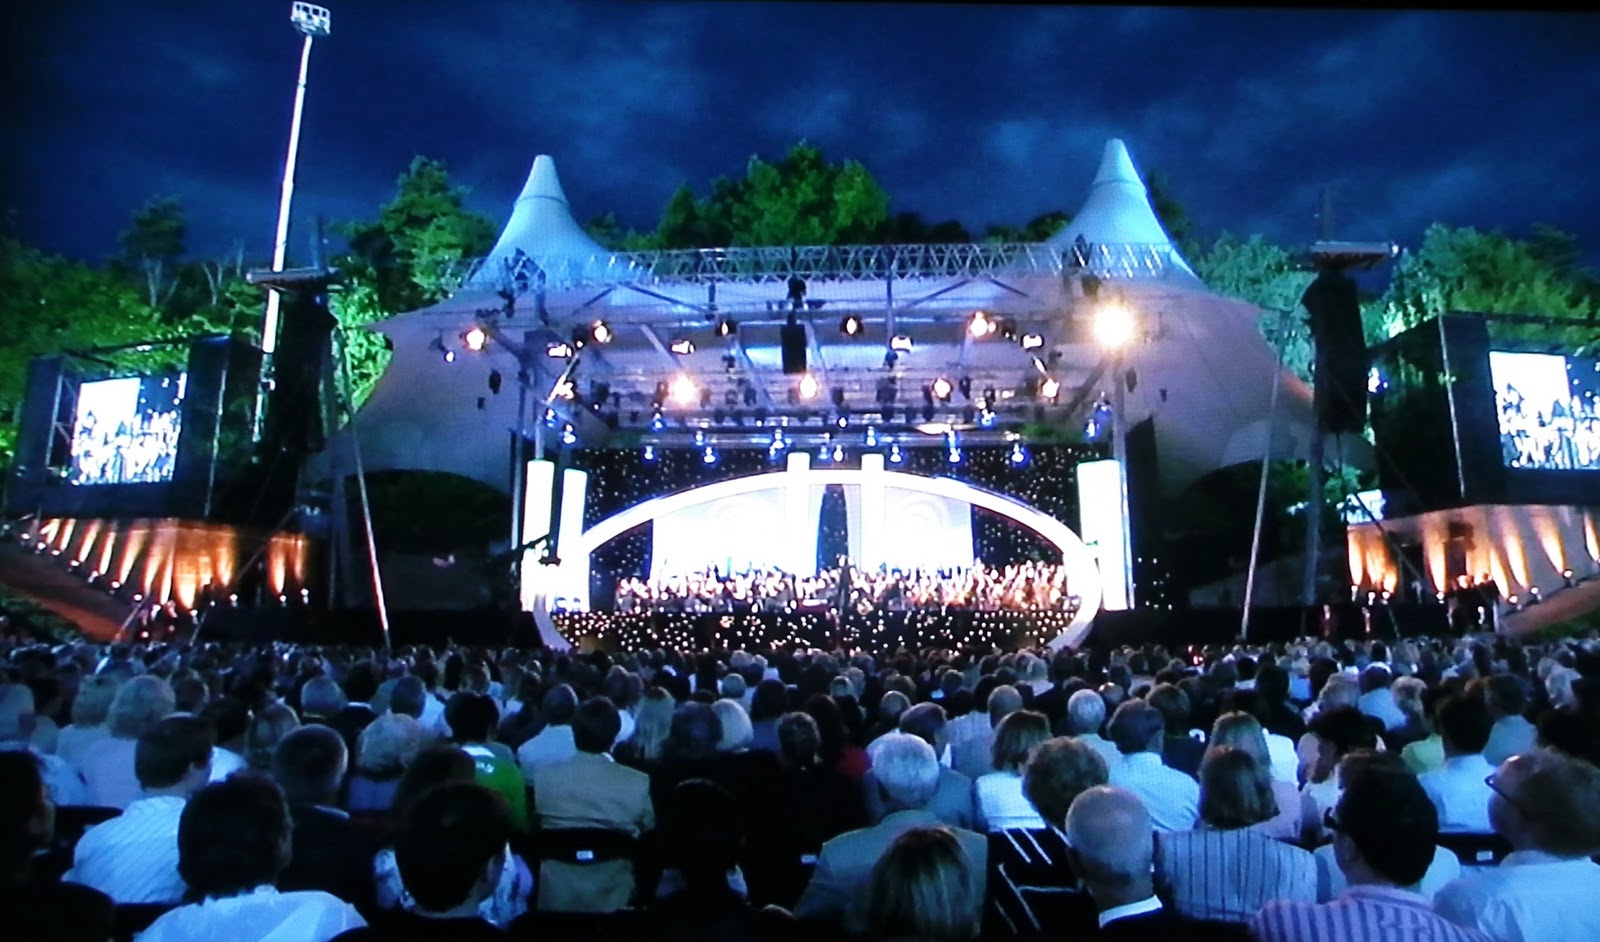 The Things I Enjoy "The Berlin Concert" with Domingo, Netrebko and